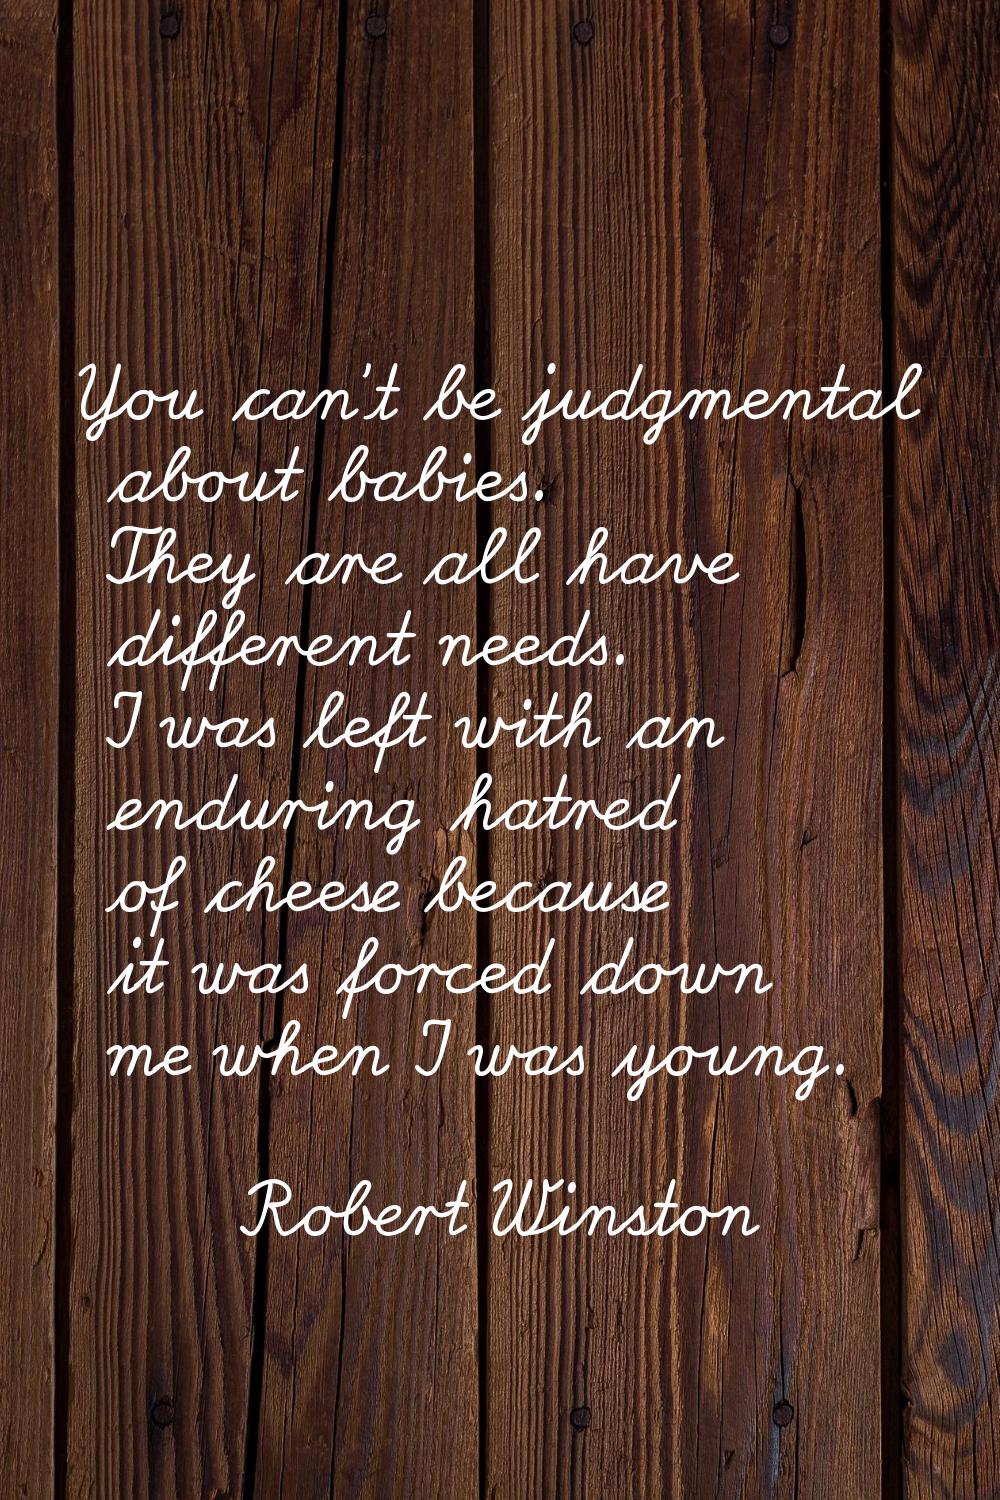 You can't be judgmental about babies. They are all have different needs. I was left with an endurin